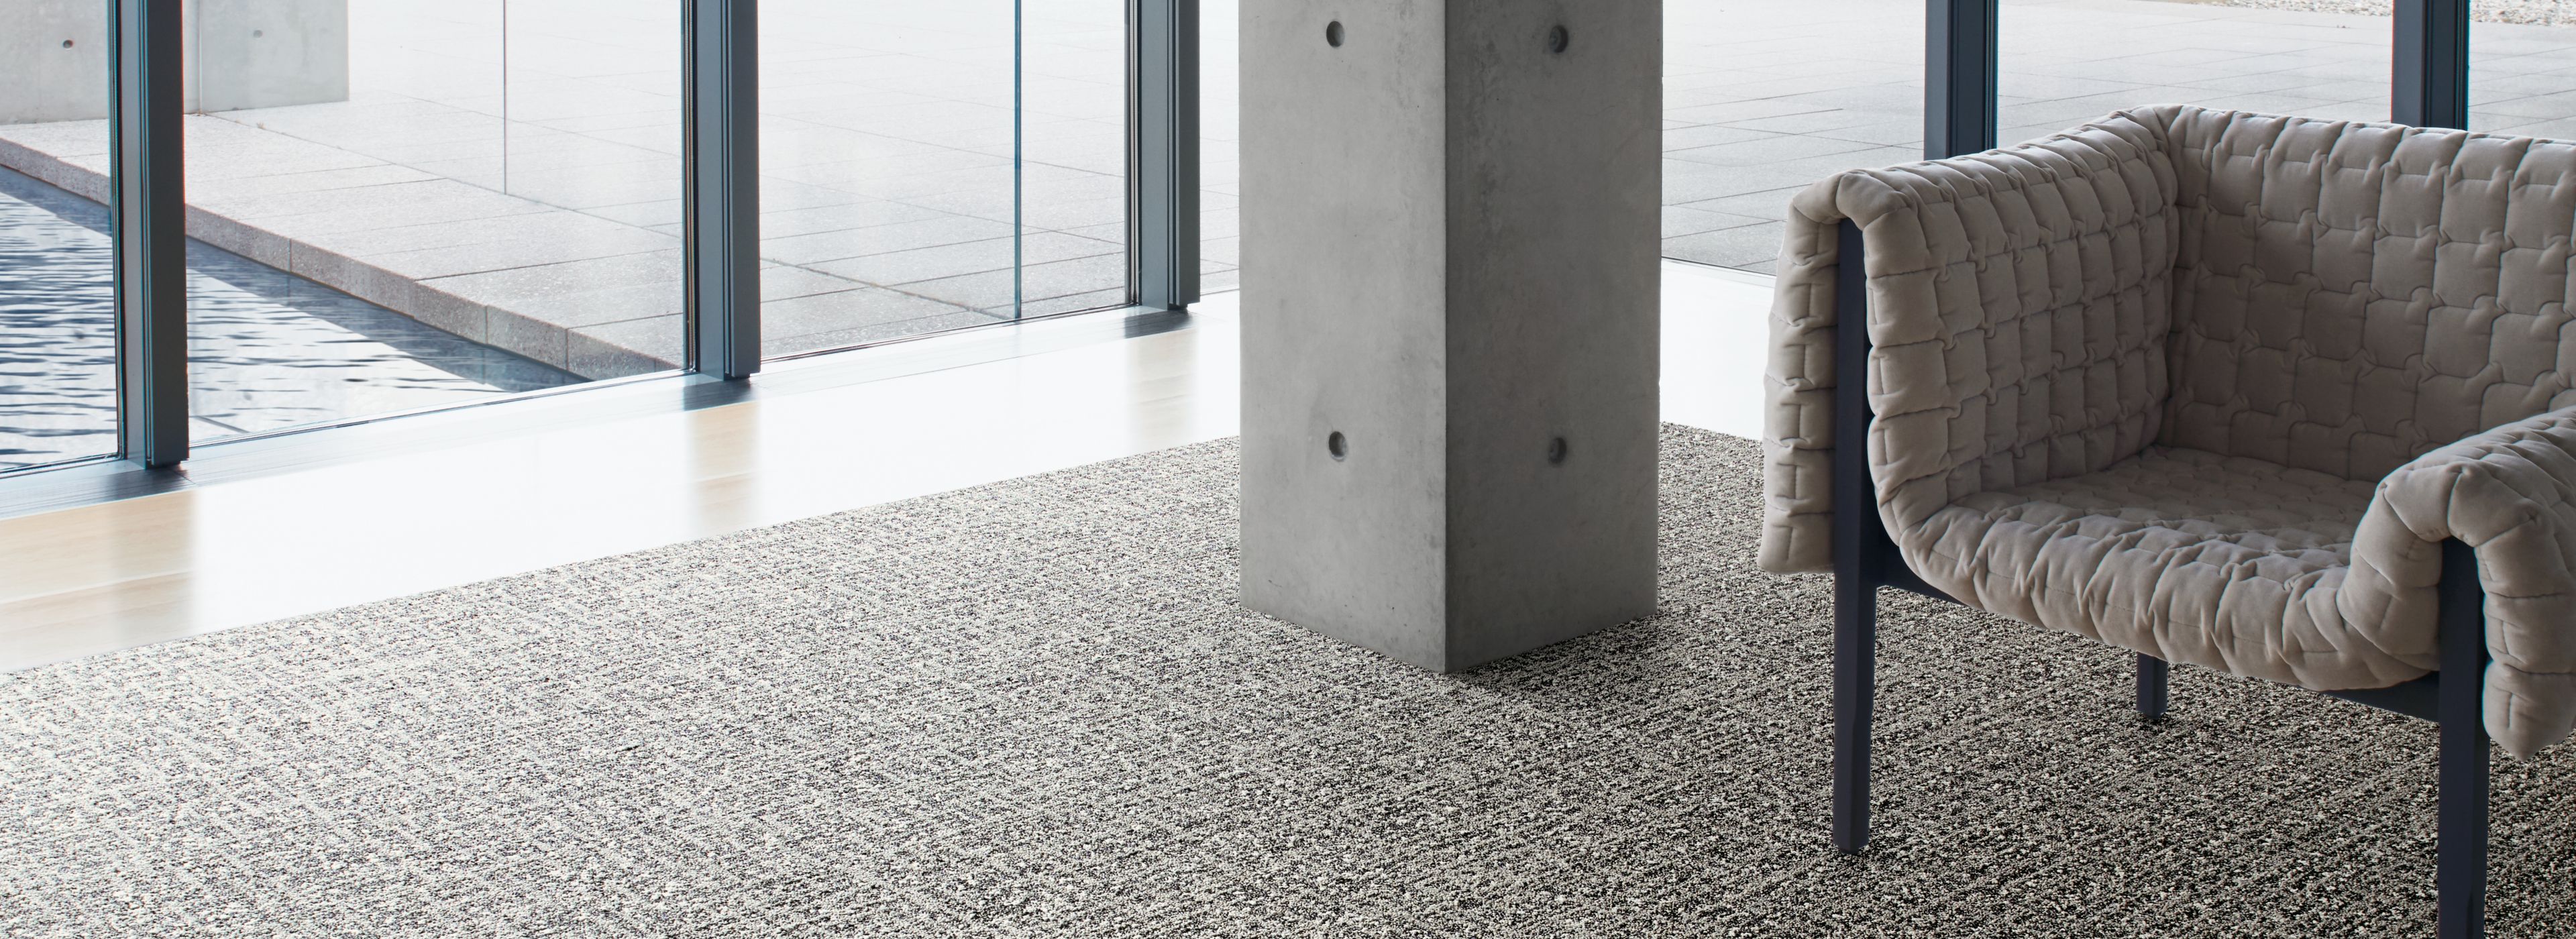 Interface WW890 plank carpet tile and Textured Stones LVT in lobby area with chair Bildnummer 1